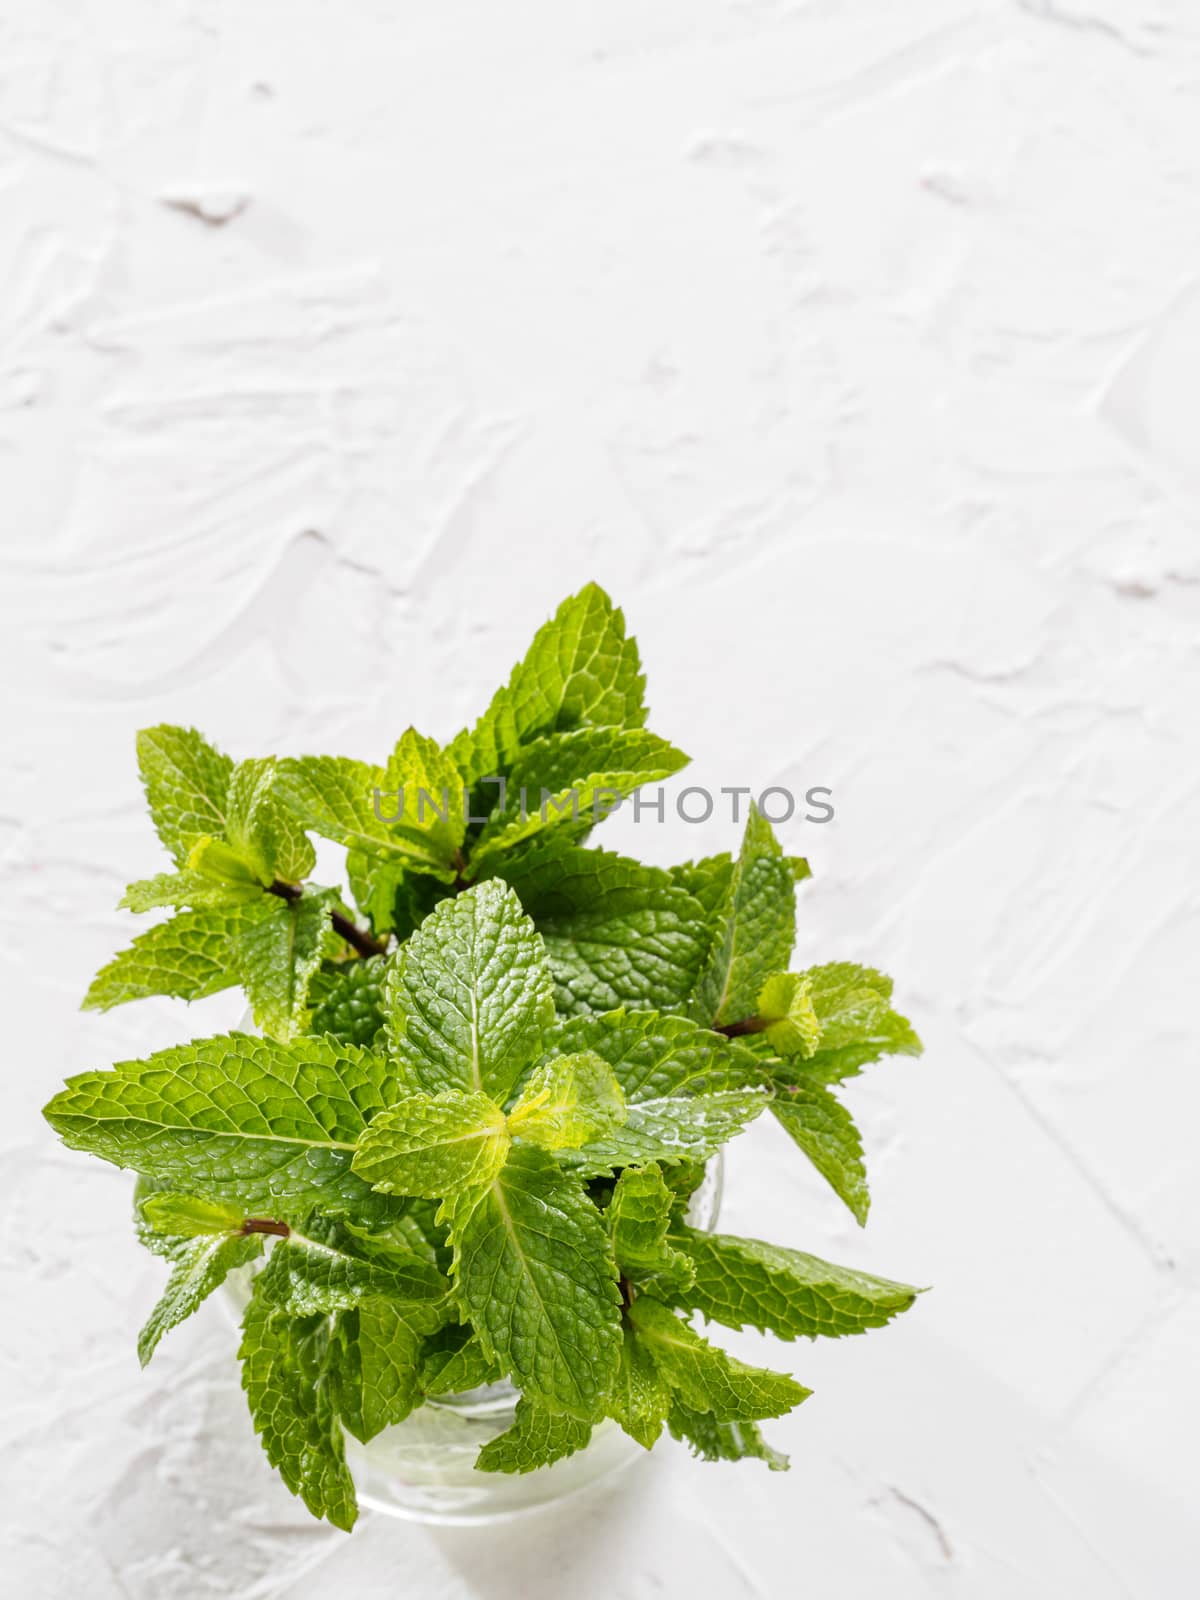 Top view sheaf of fresh mint leaf on white background by fascinadora